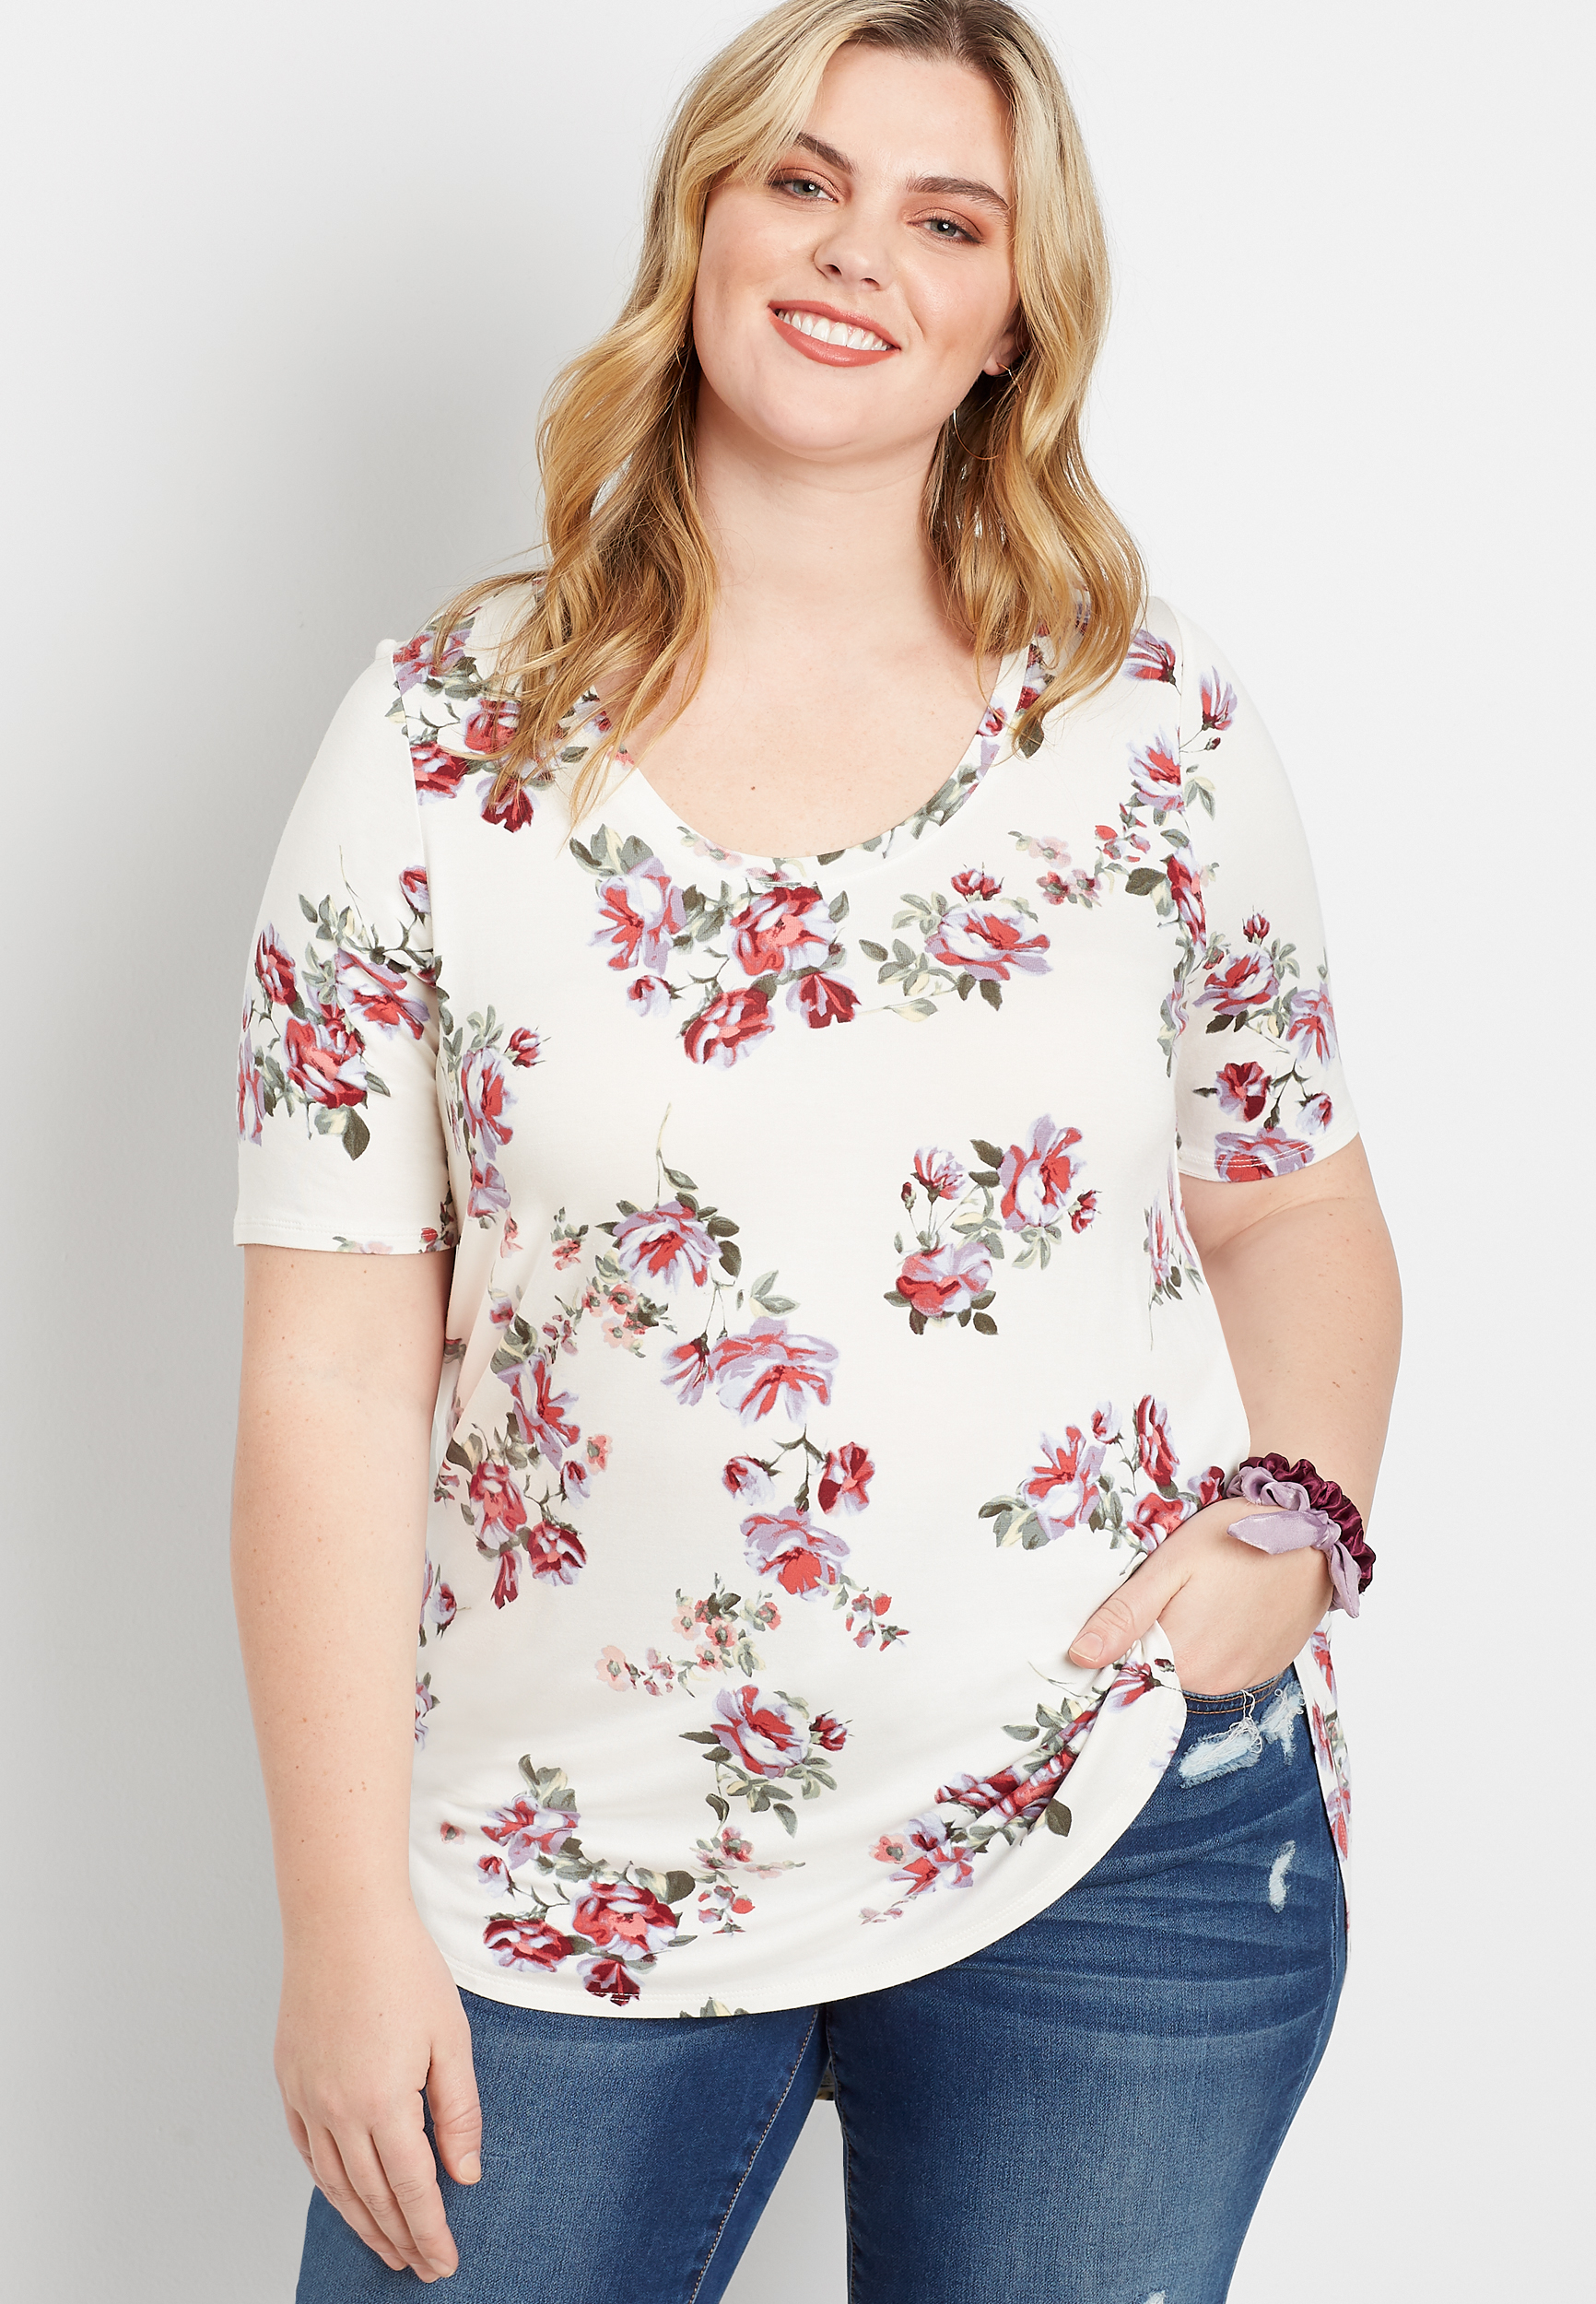 Plus Size 24/7 White Floral Flawless Tunic Tee | maurices